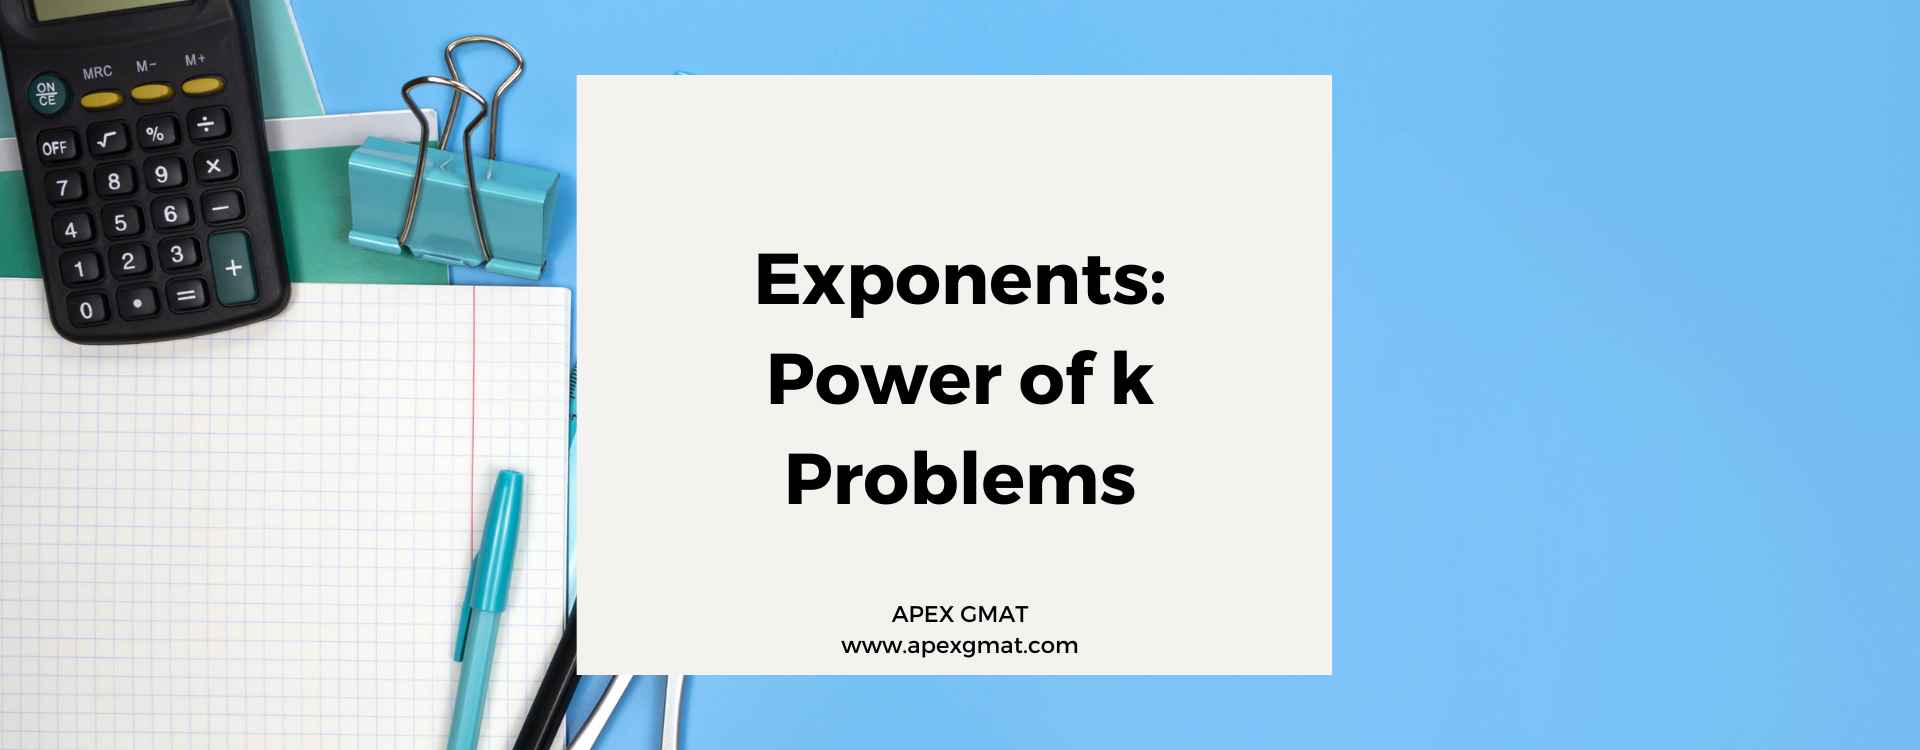 Exponents: Power of k Problems